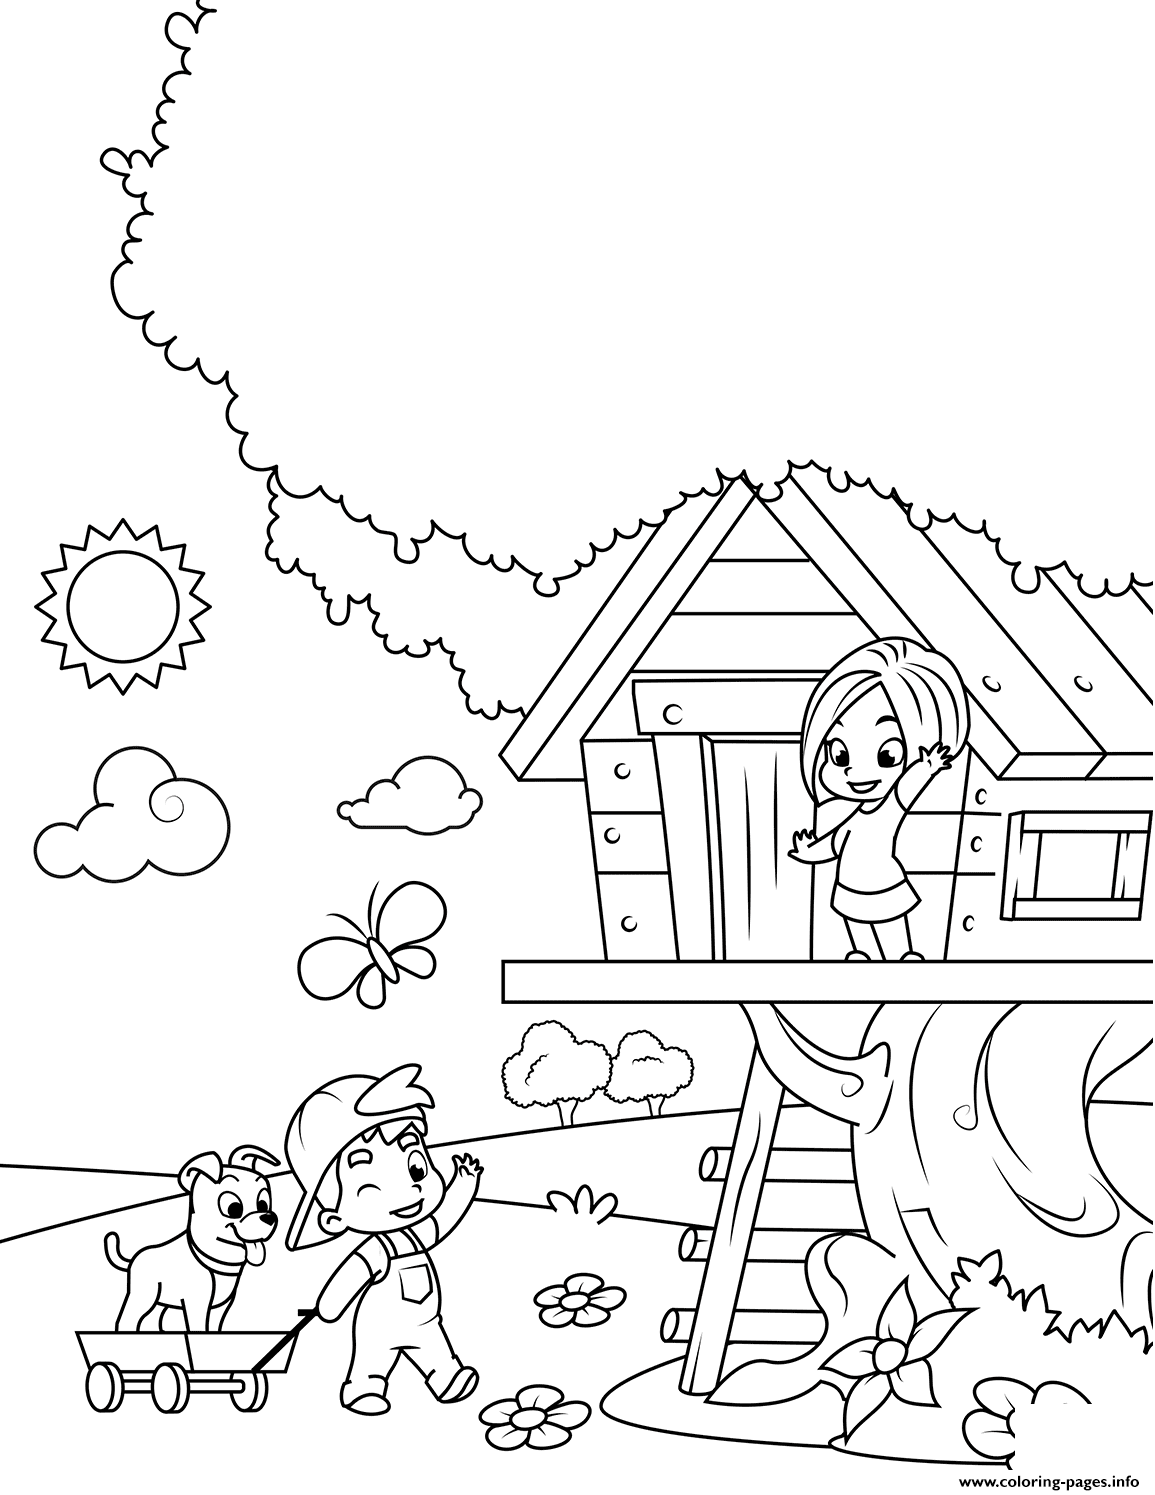 Boy And Girl Playing In A Tree House coloring